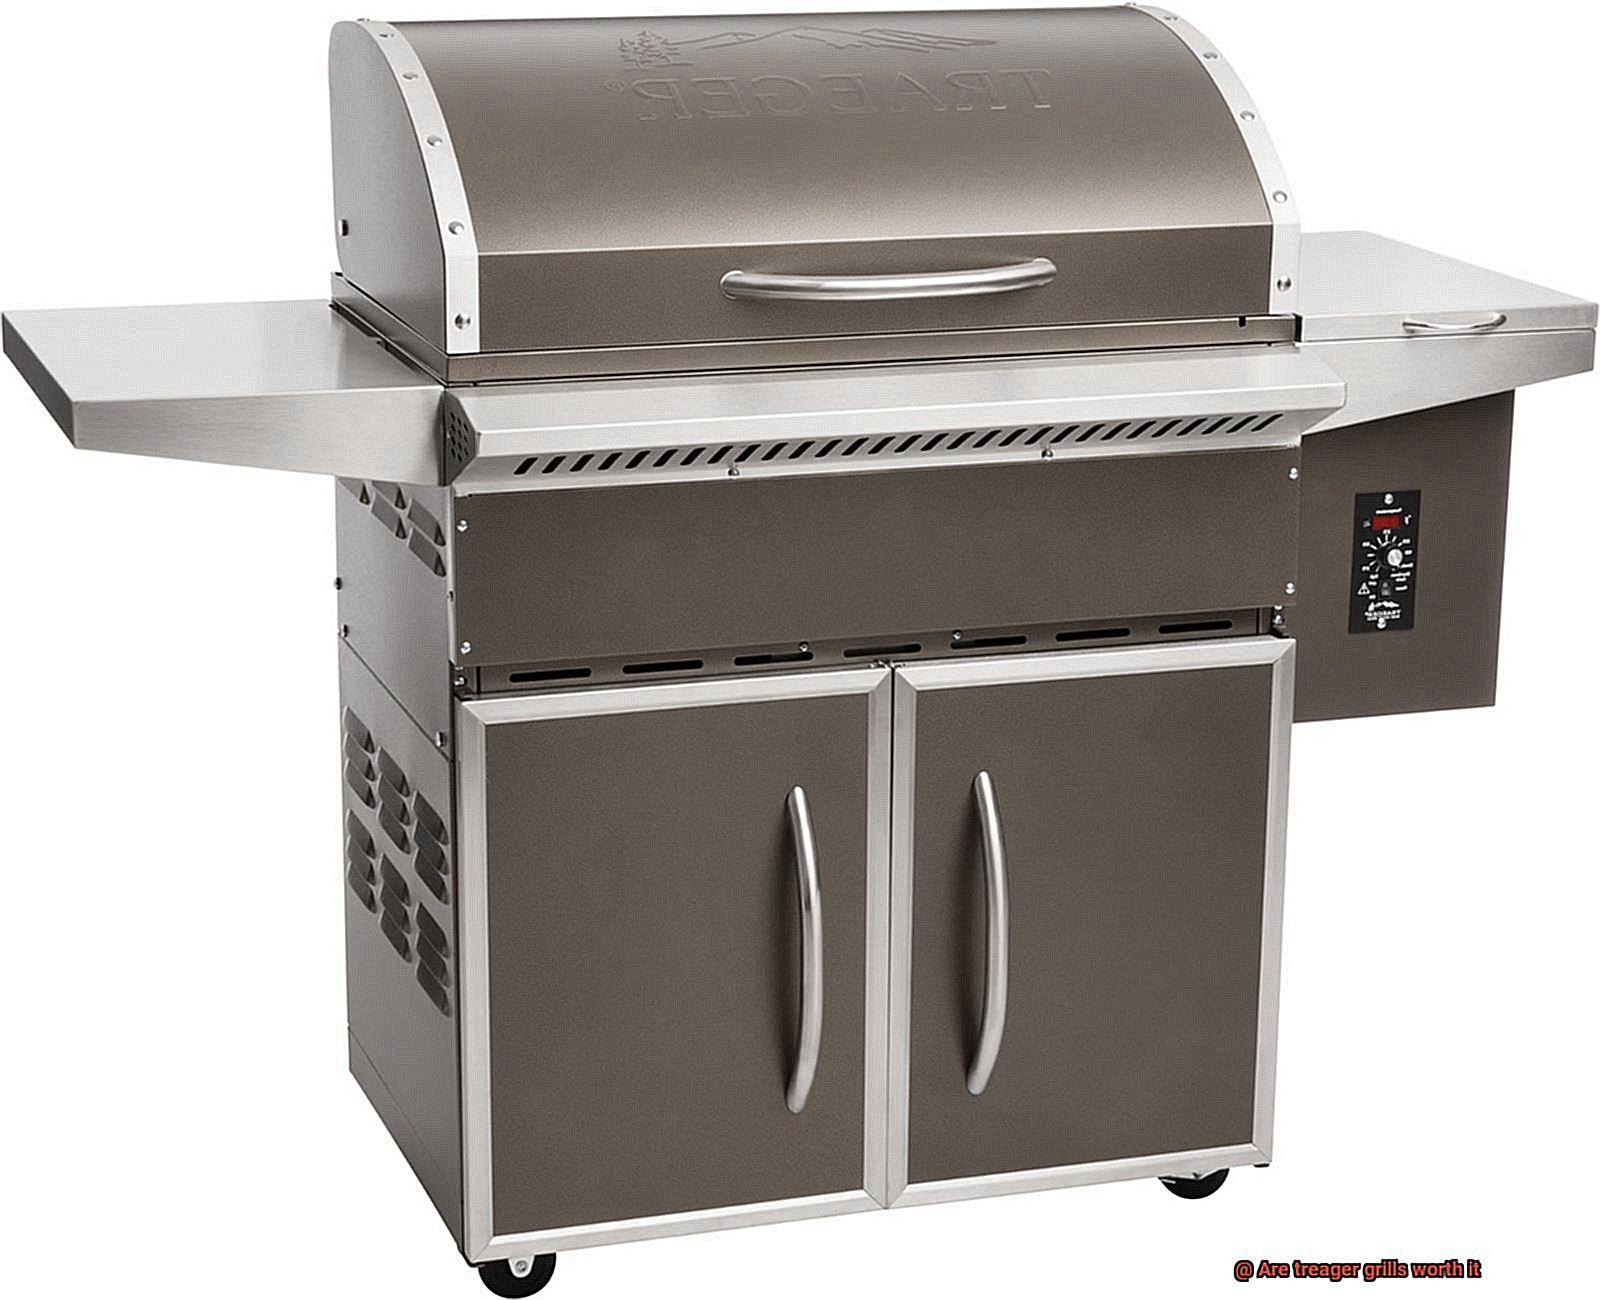 Are treager grills worth it-4